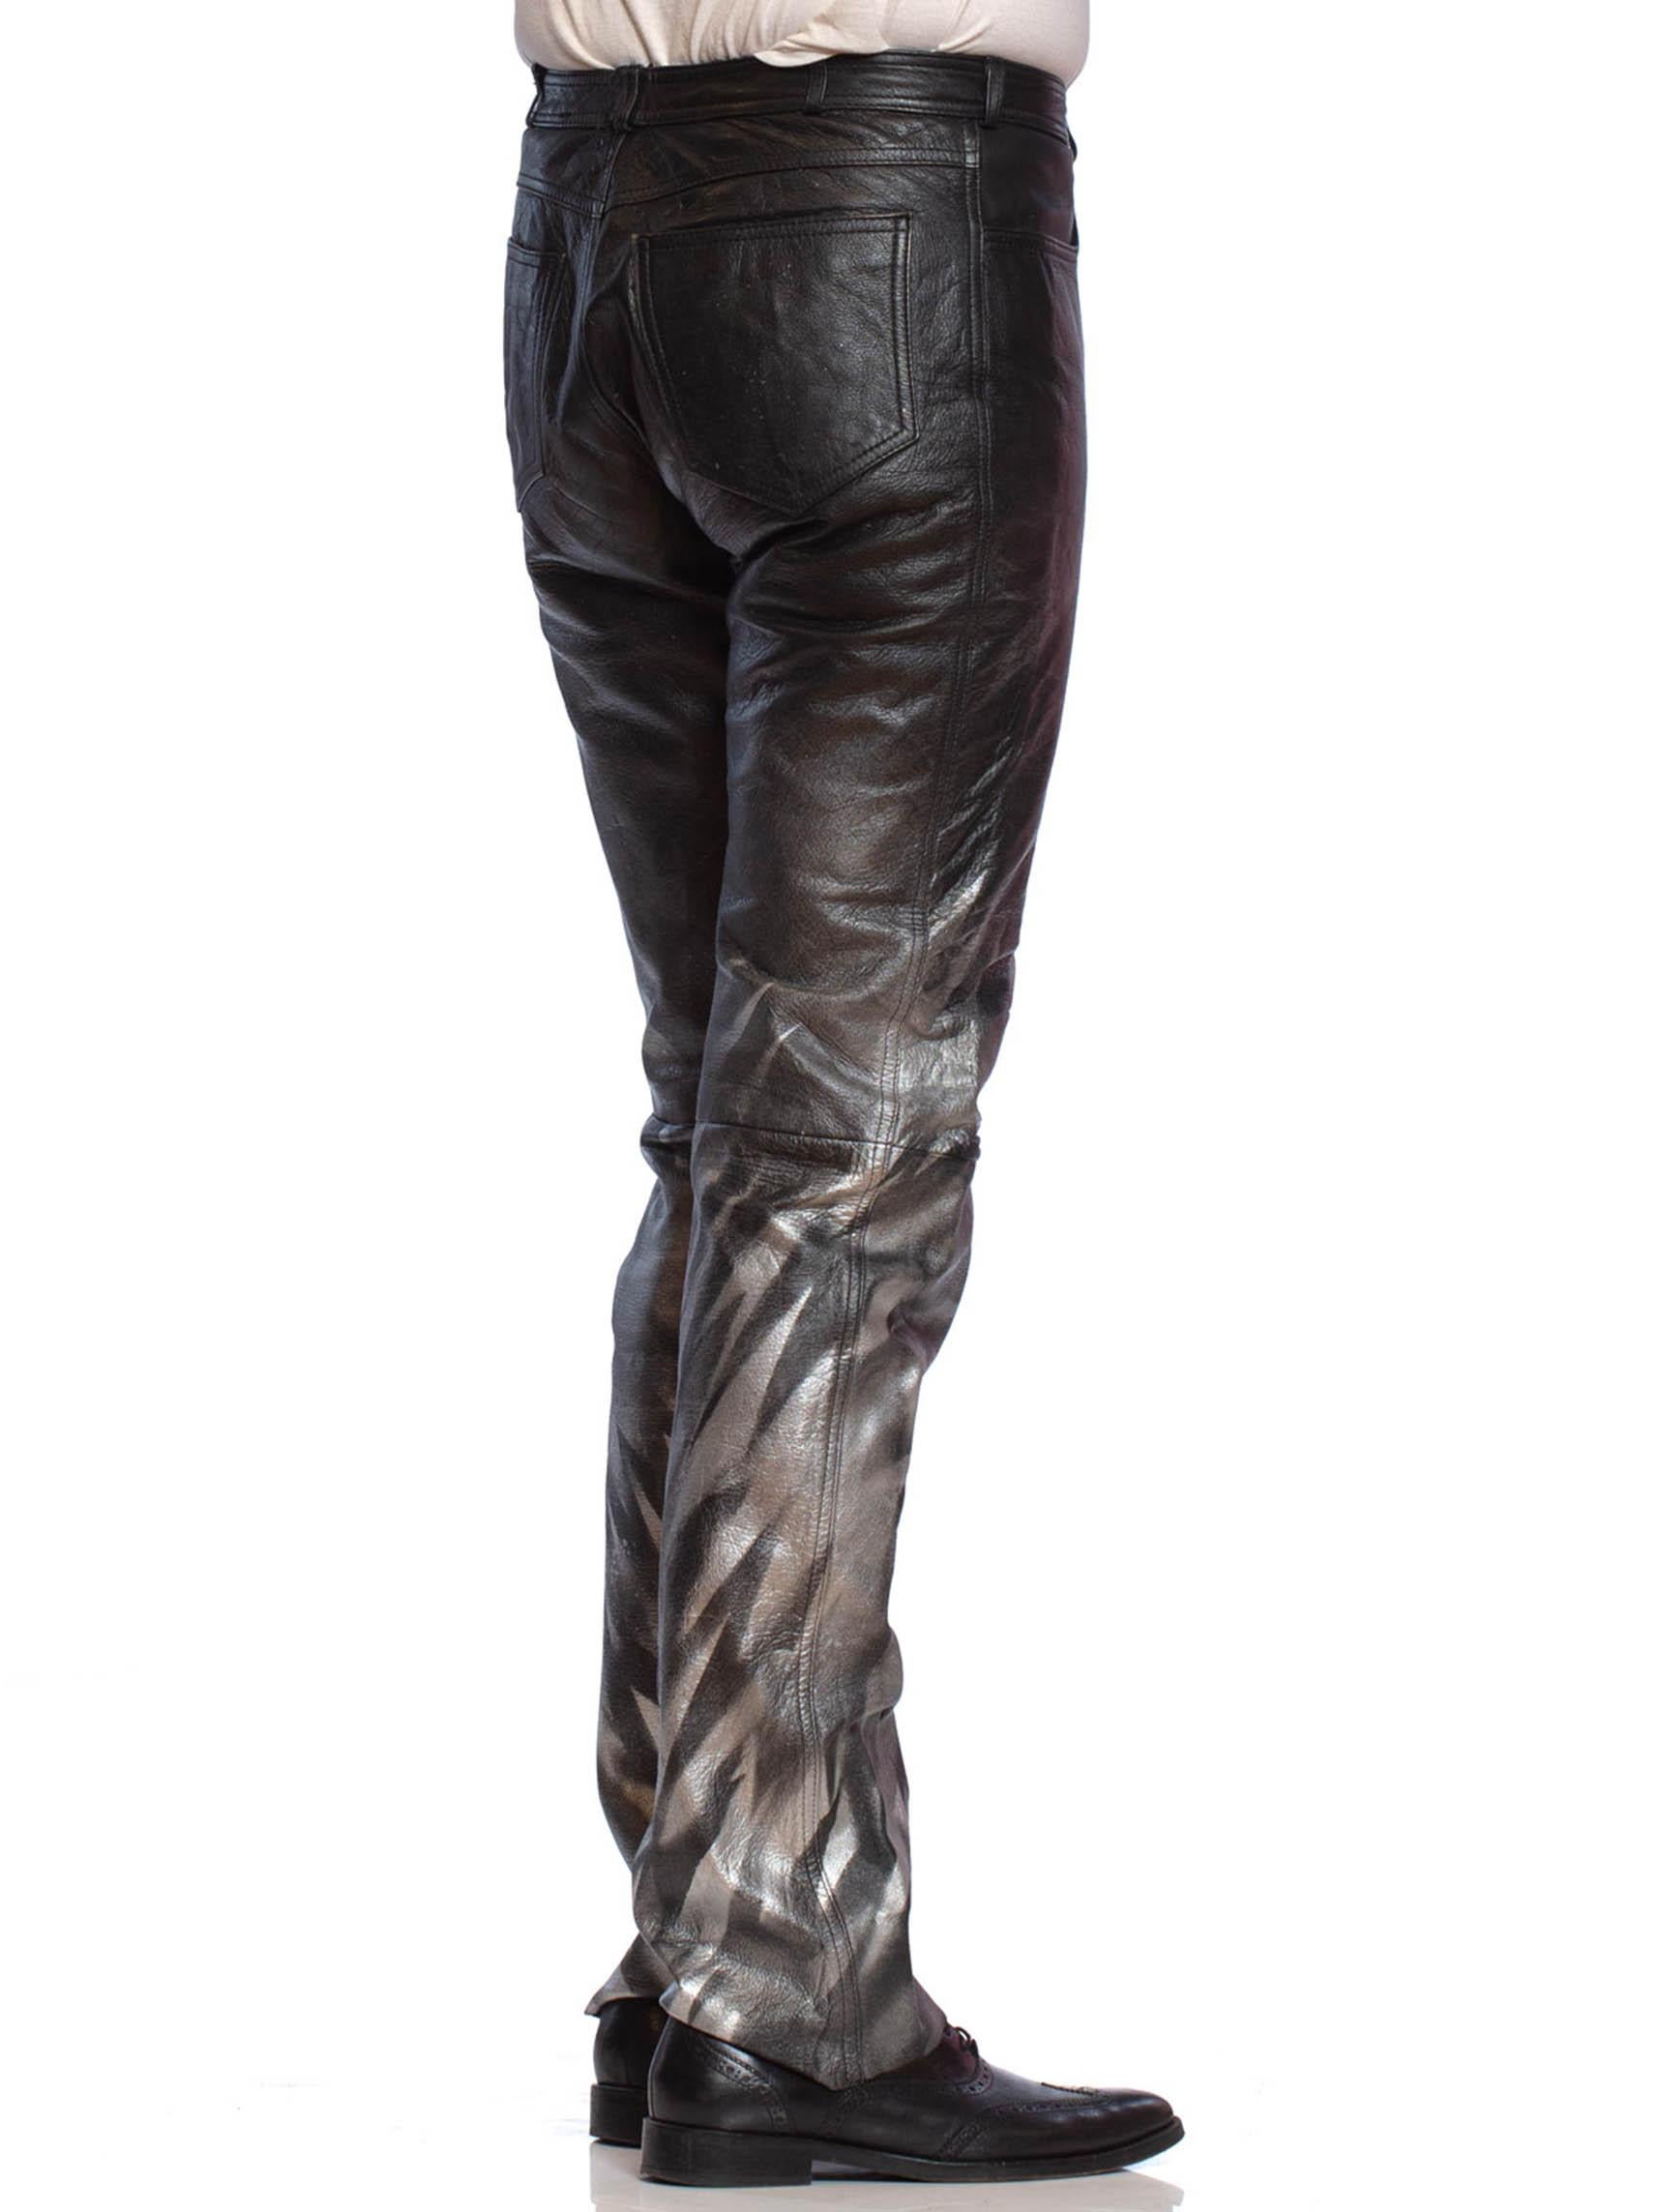 1980S Black Leather Men's Pants With Silver Metallic Graffiti In Excellent Condition For Sale In New York, NY